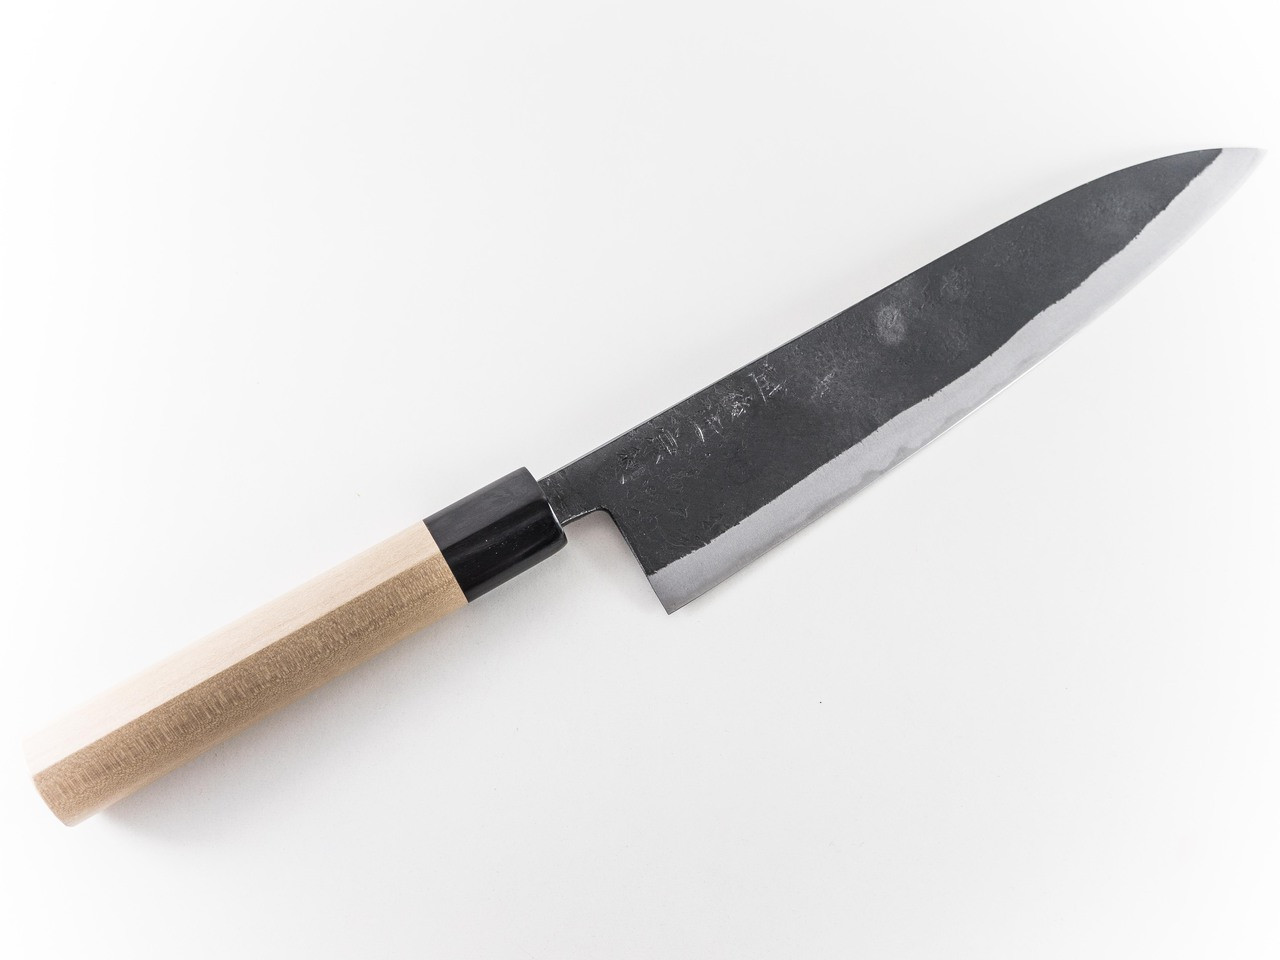 Eyeing a Japanese Chef's Knife? These Are the Three Brands to Know